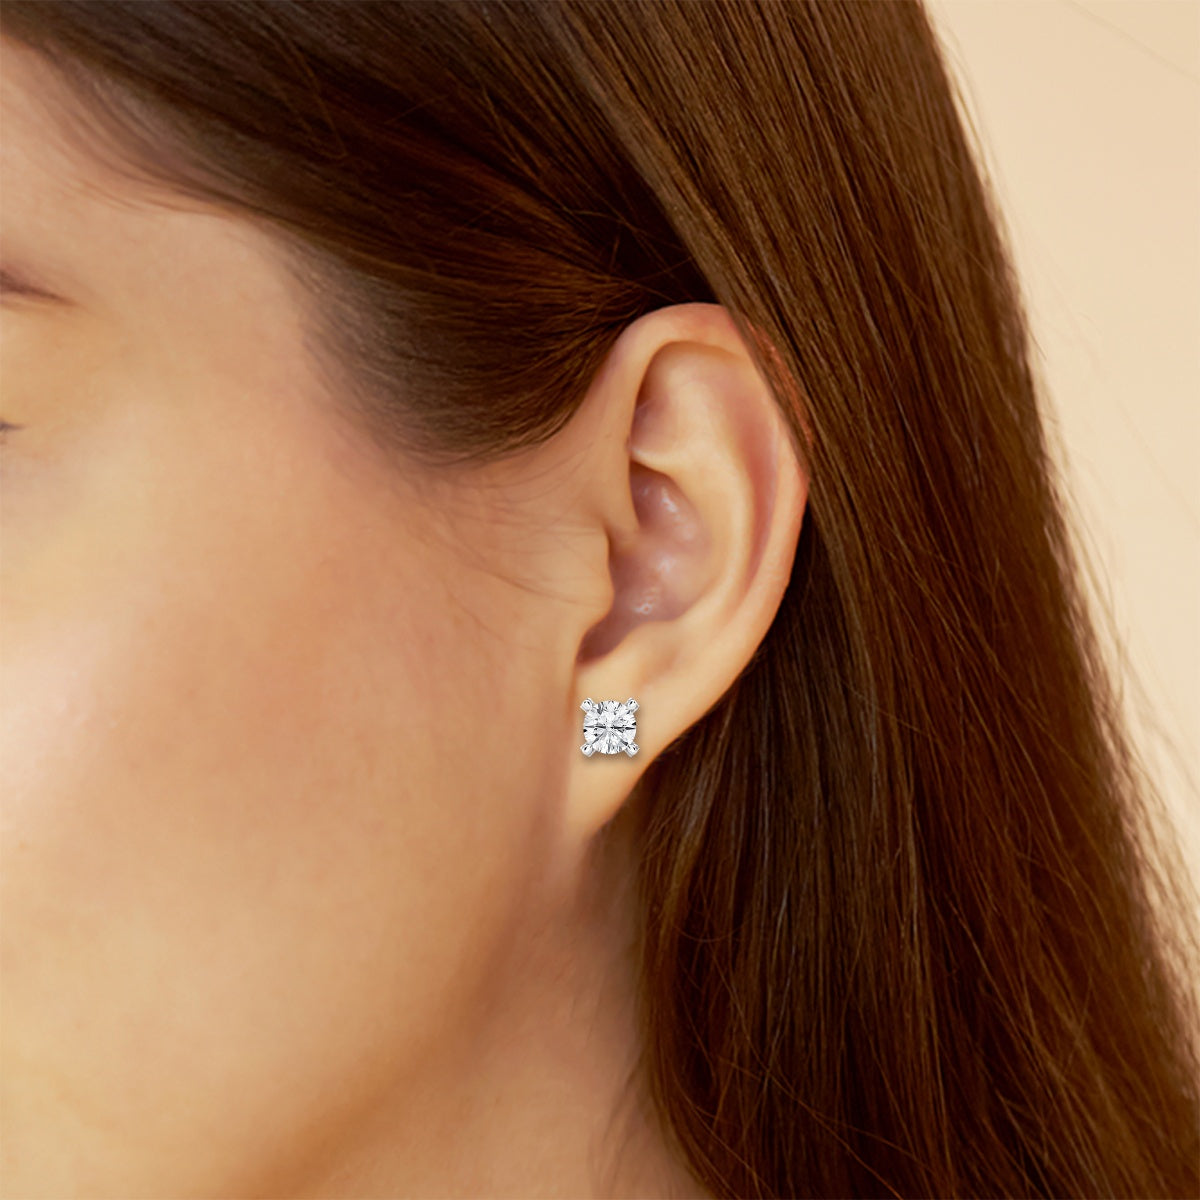 A pair of classic diamond stud earrings in white gold featuring lab-created diamonds on ear